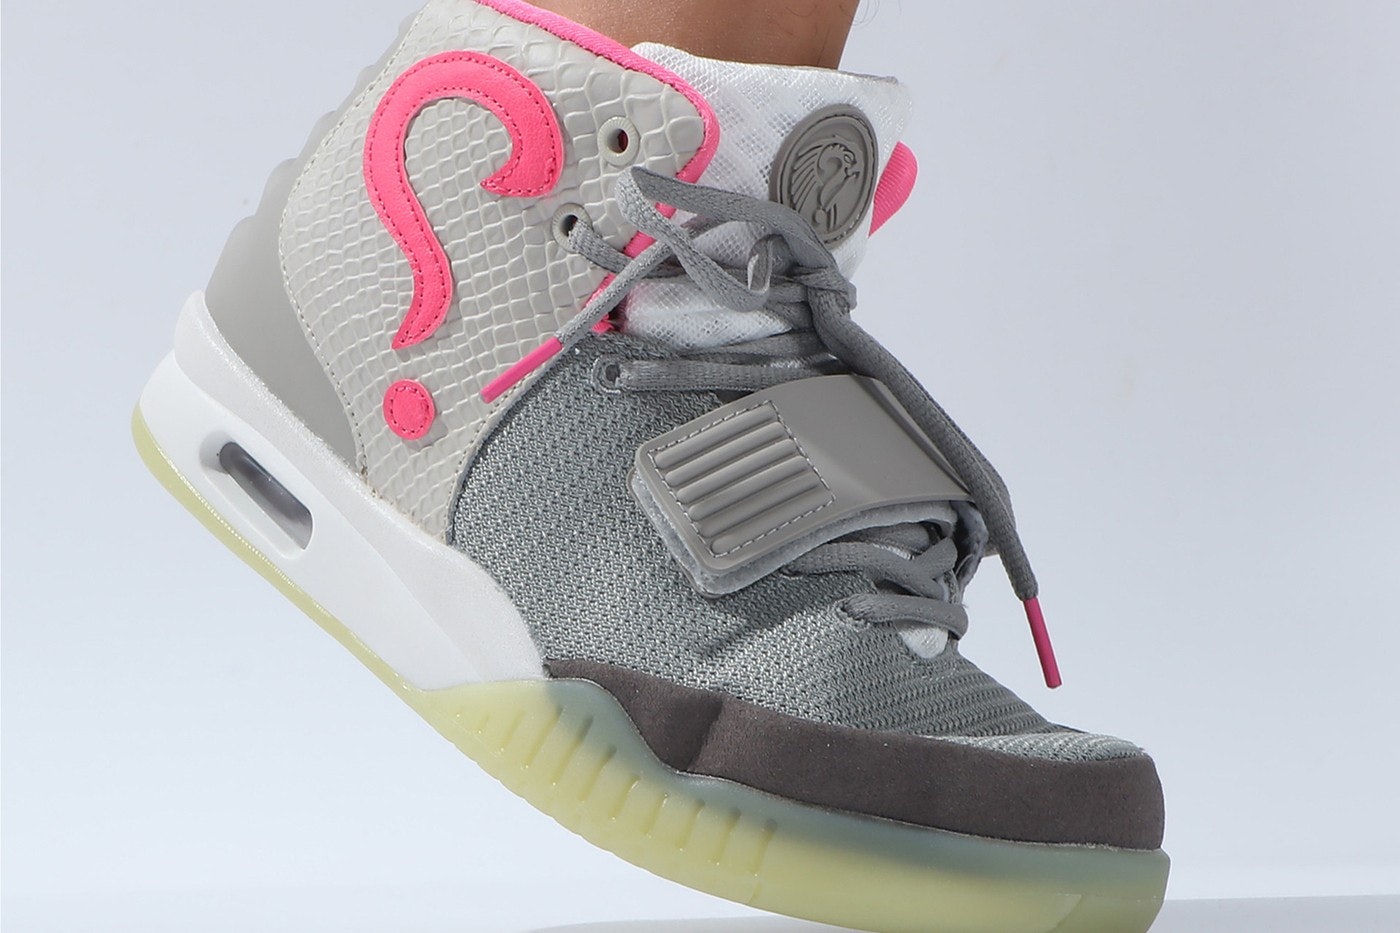 iconic Nike Air Yeezy 2 sneakers